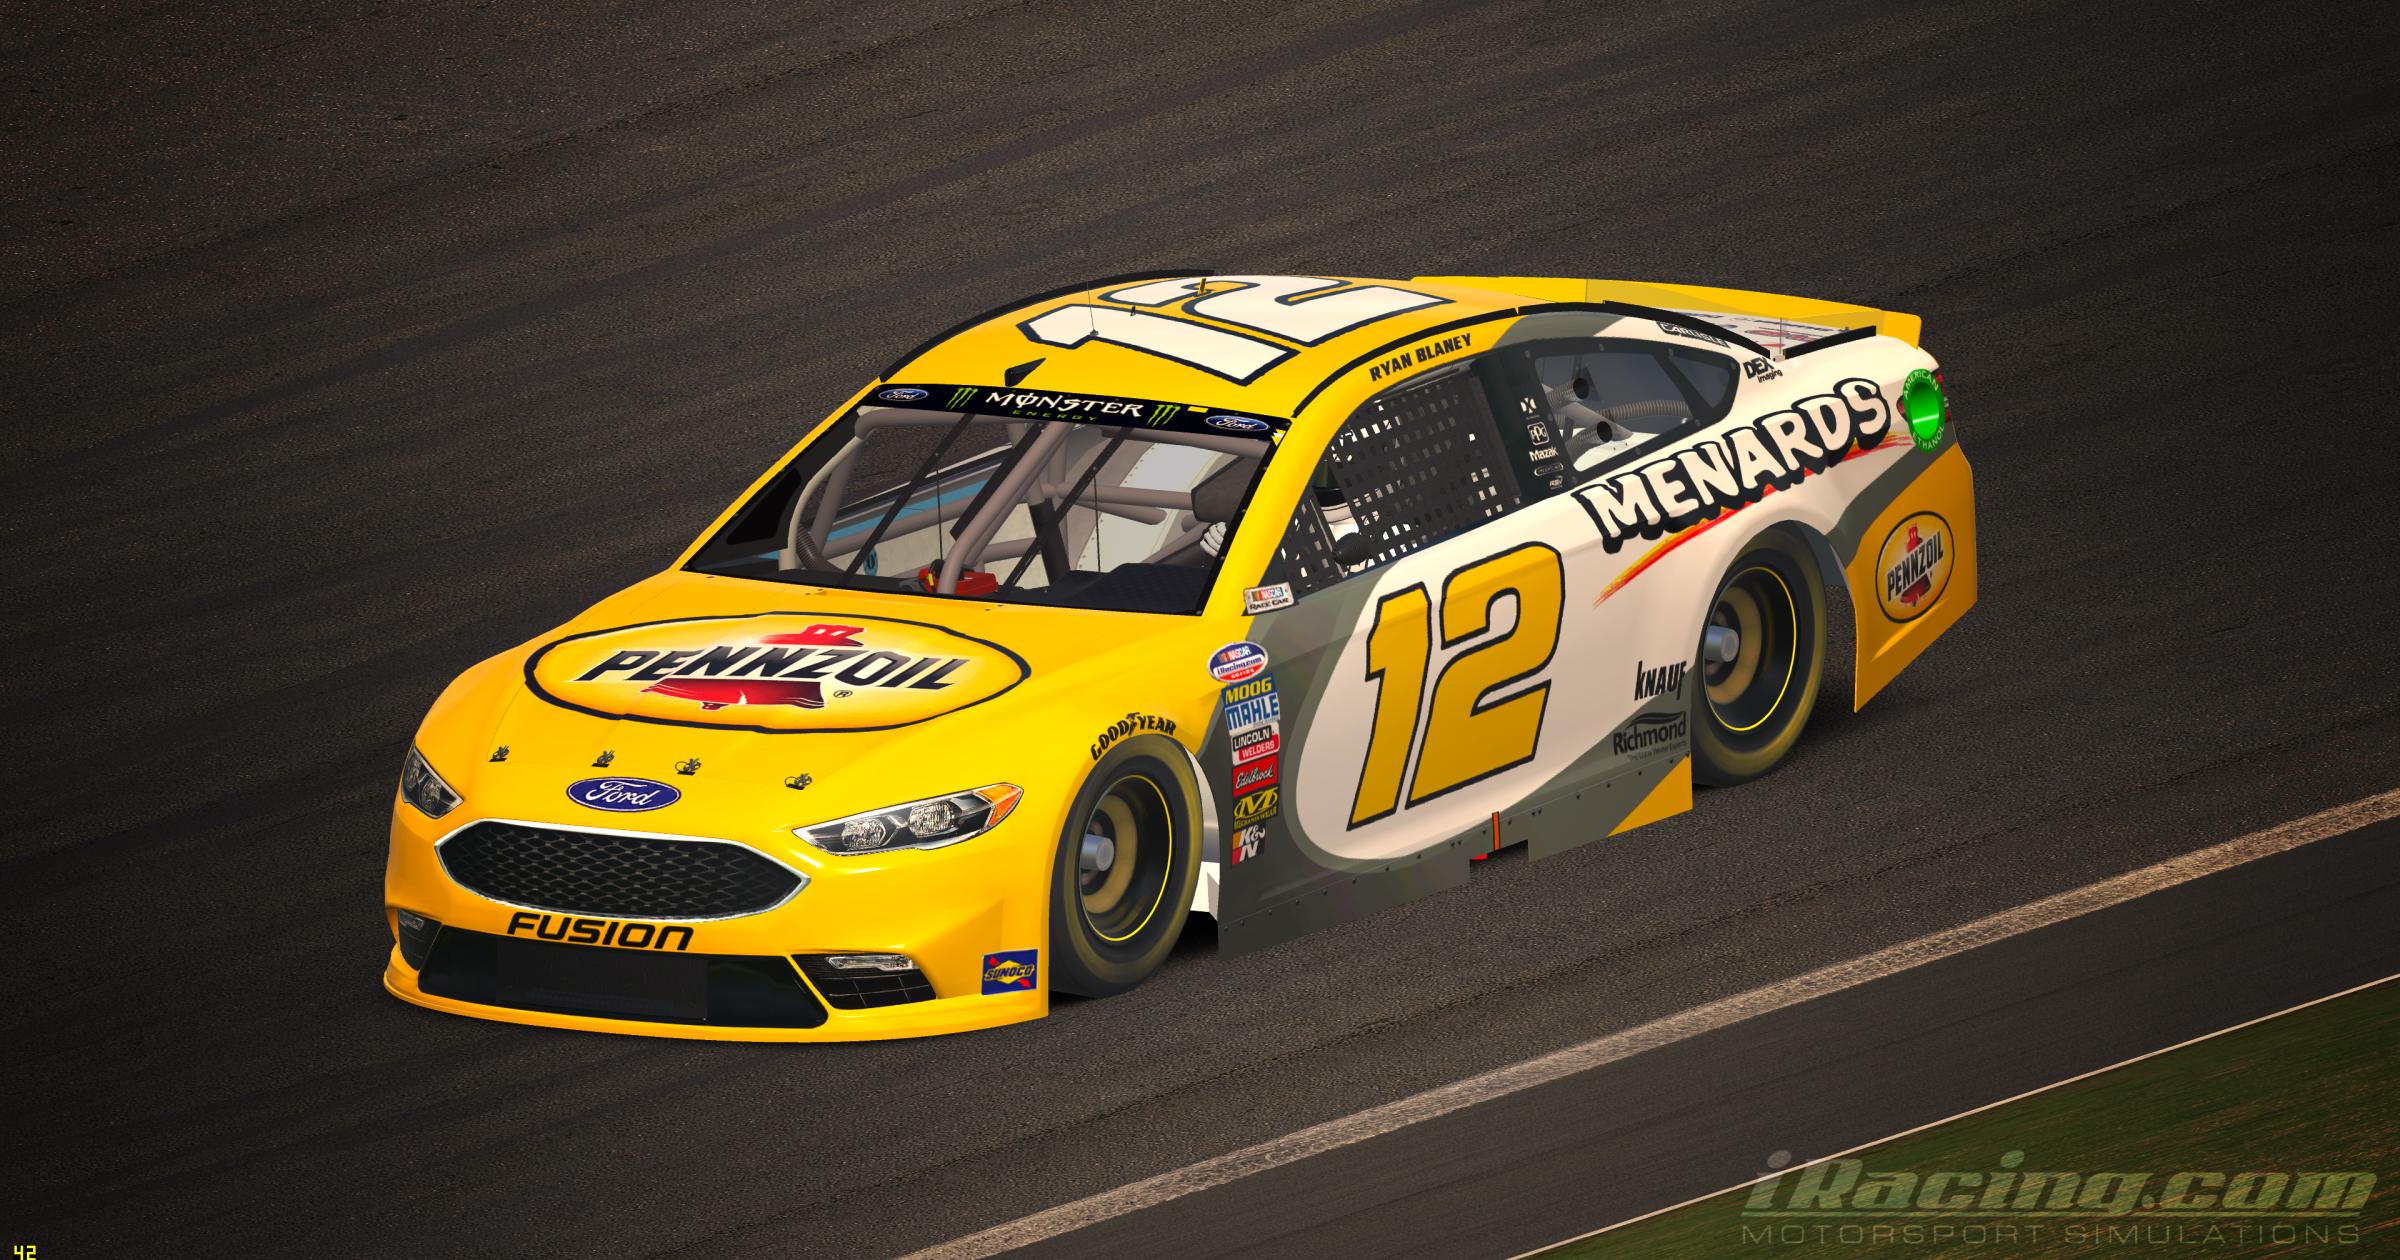 Preview of Ryan Blaney 2018 Pennzoil by Tyler King